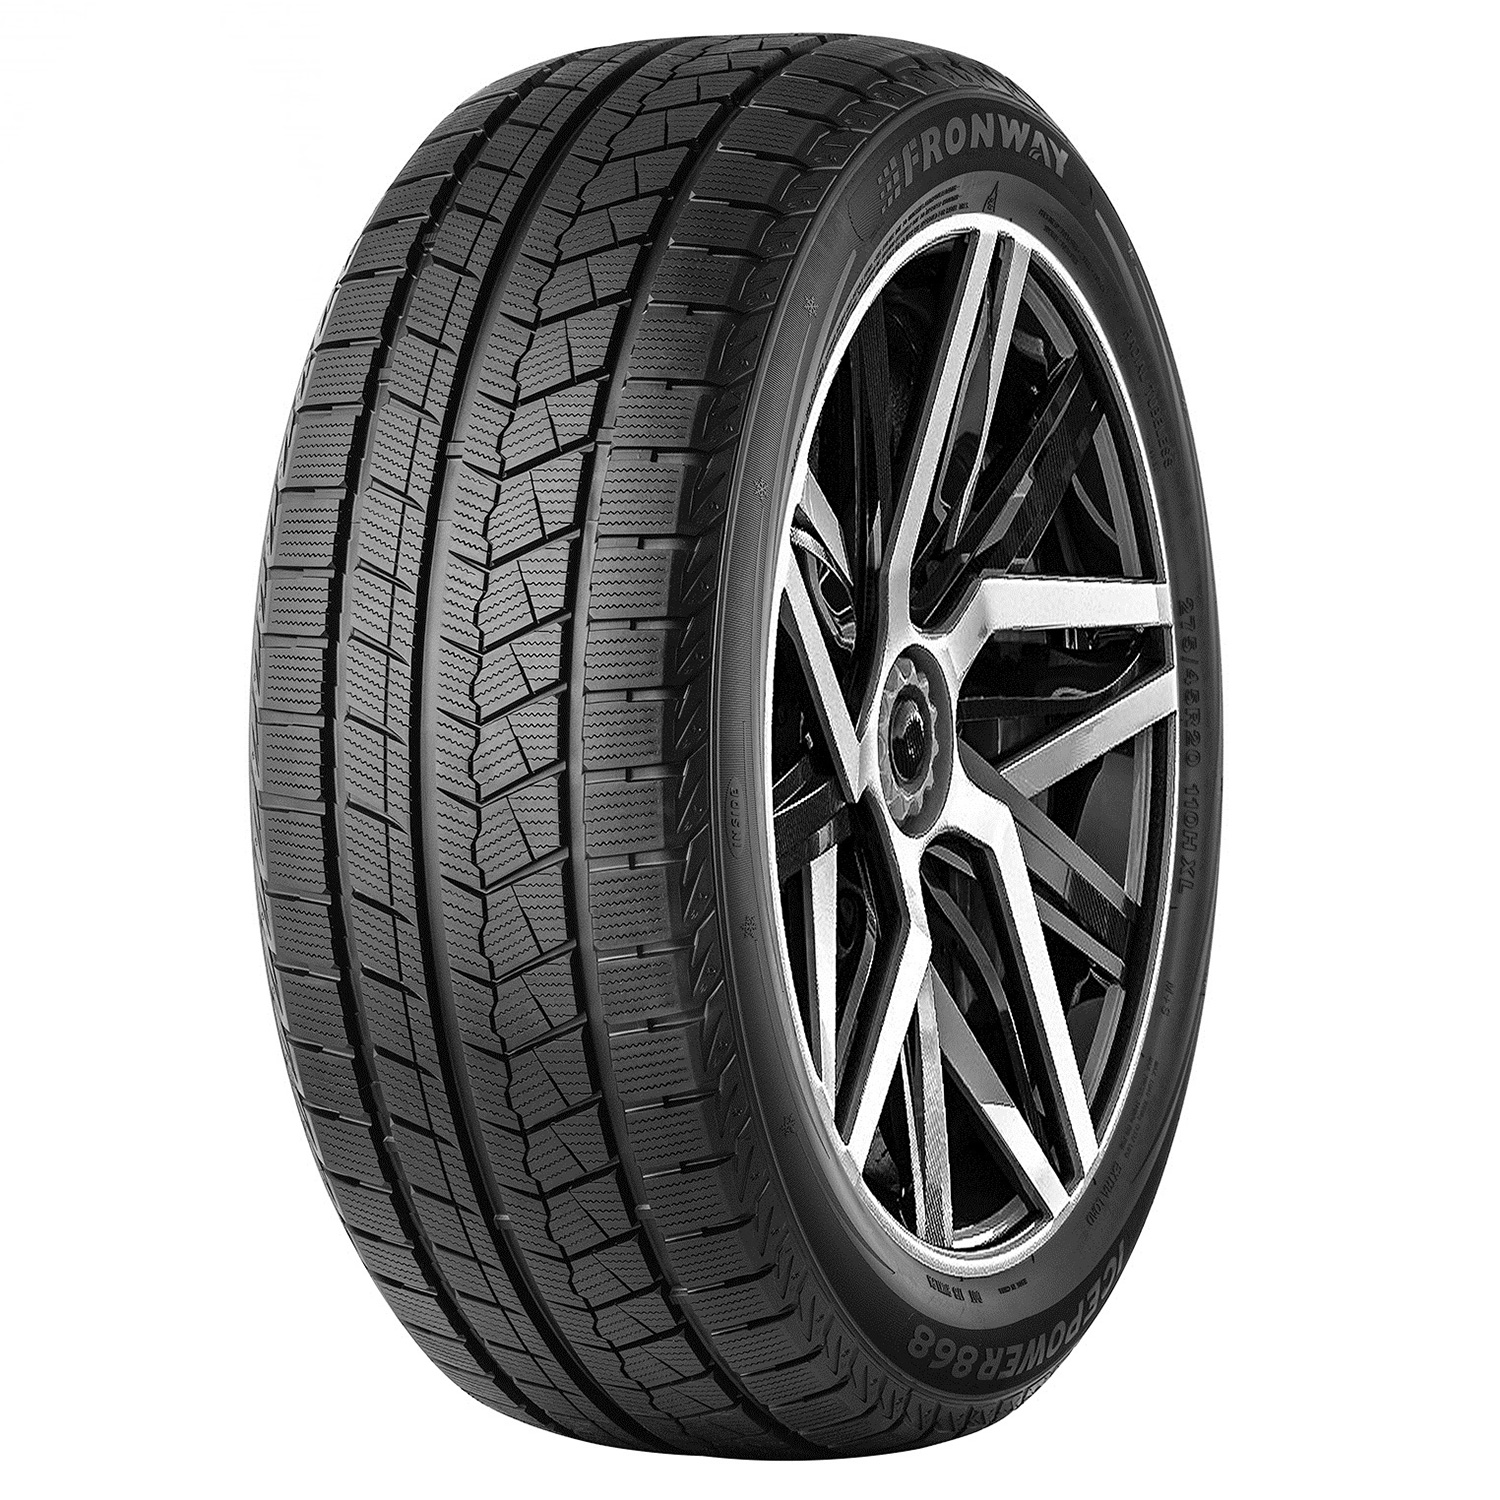 Автошина FRONWAY ICEPOWER 868 265/60 R18 110 T